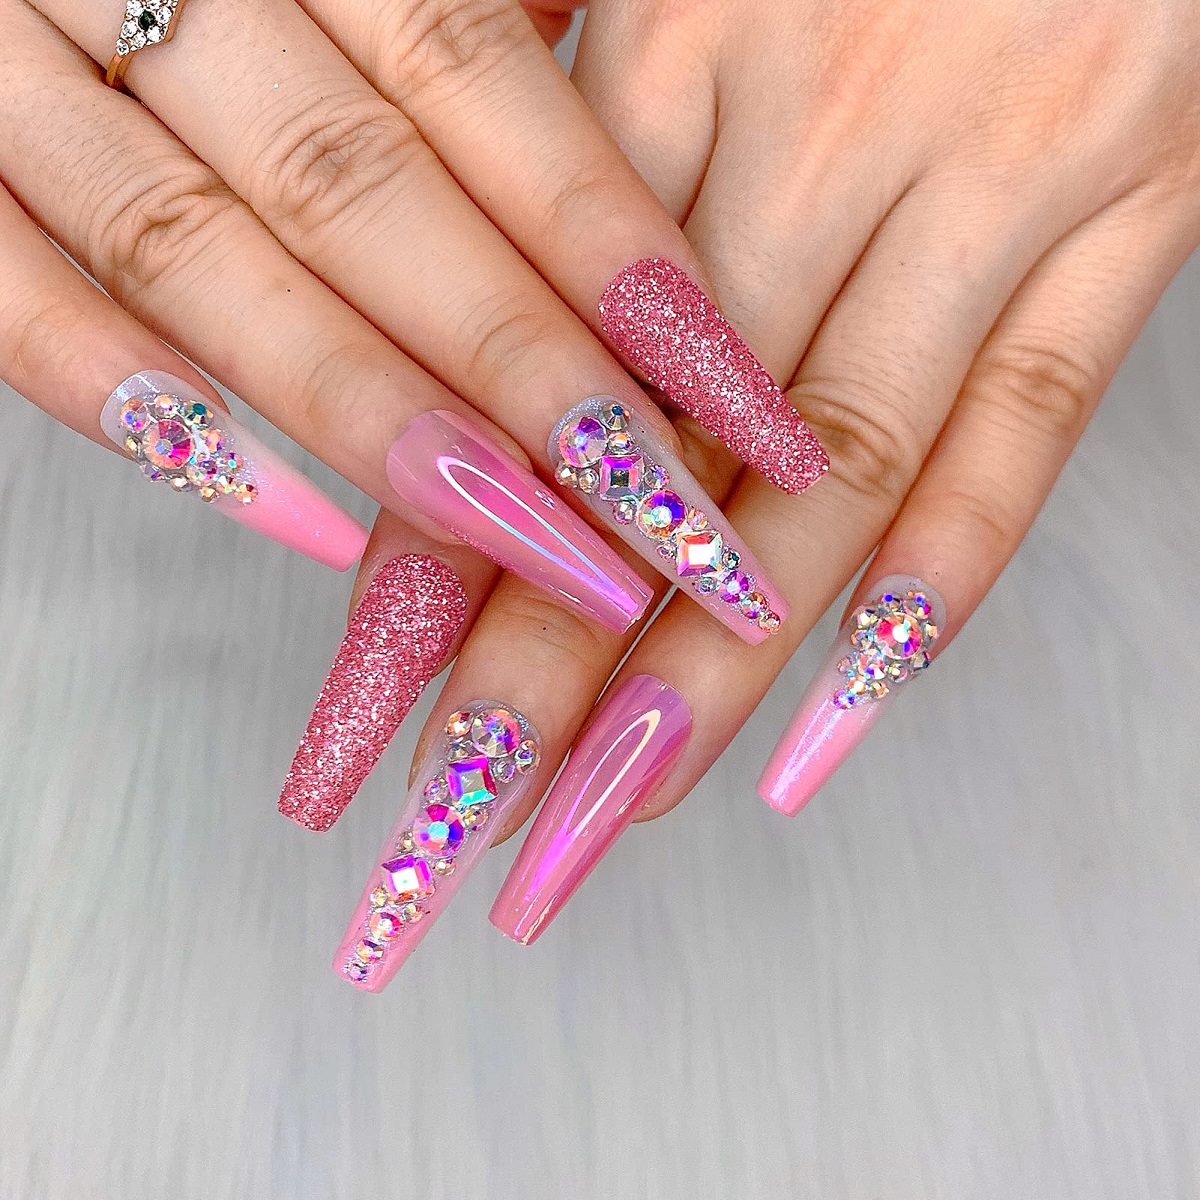 Blinged out Coffin Nails